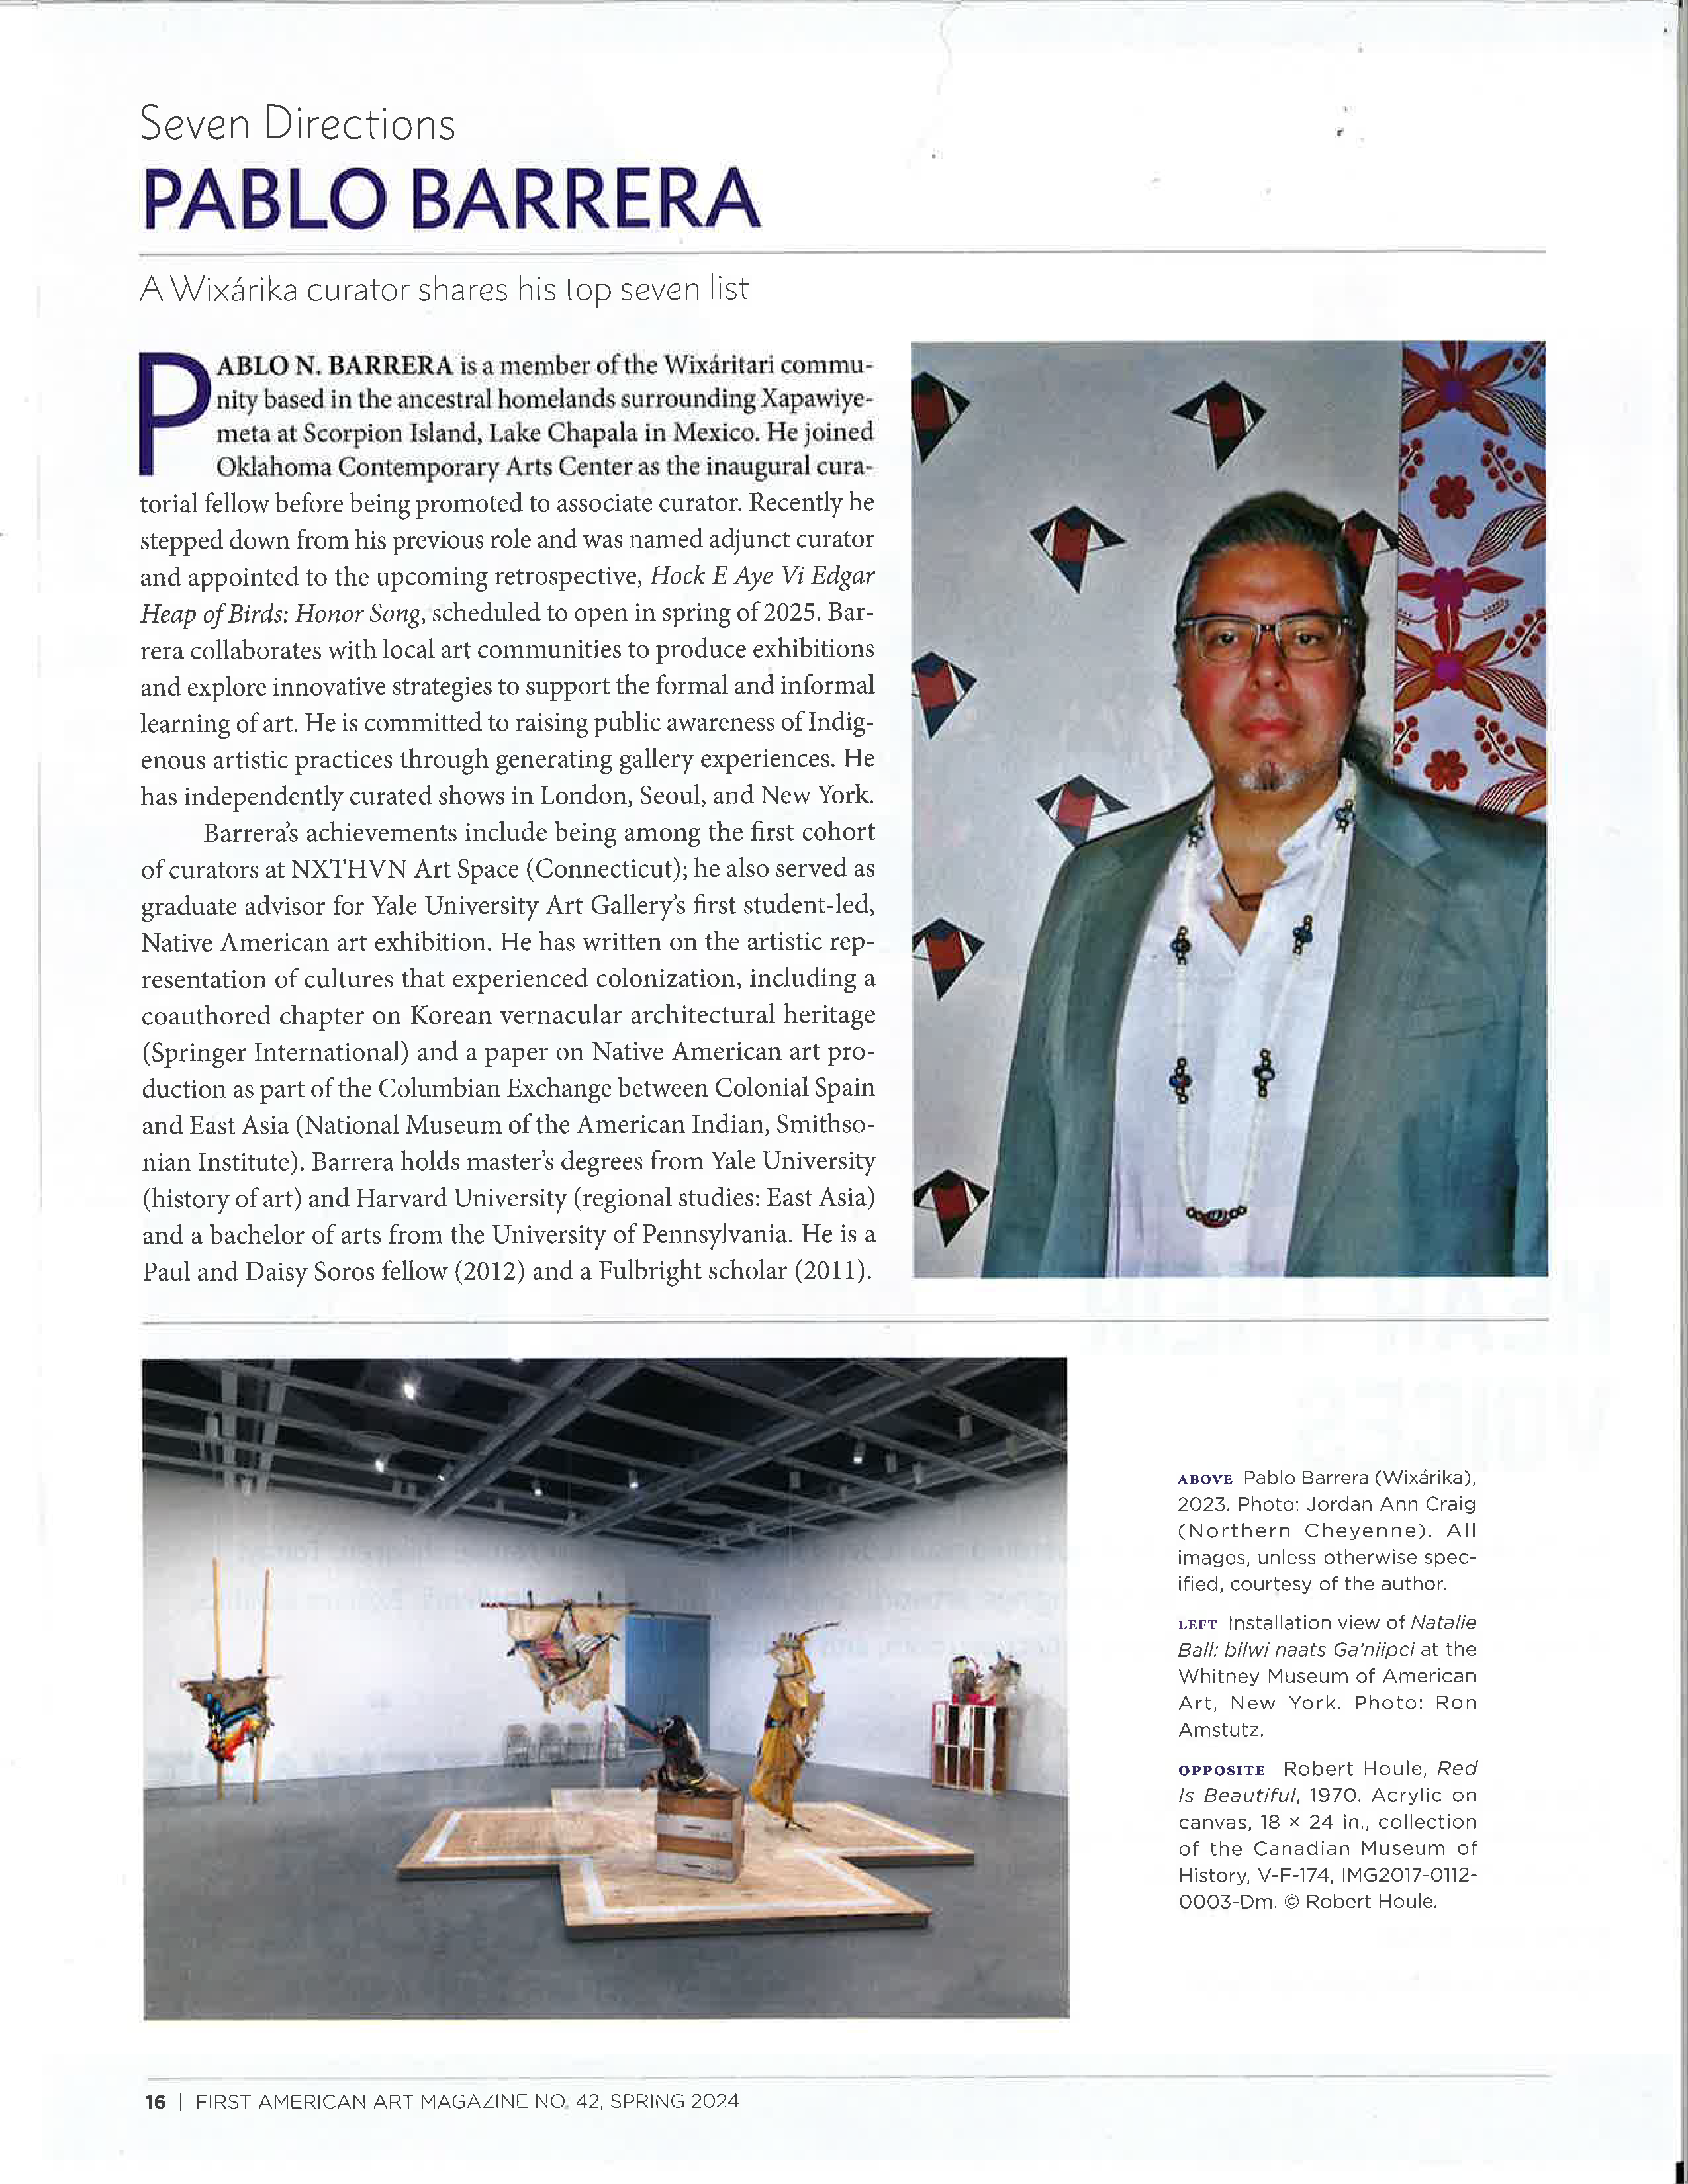 A magazine article with photos of a person in a gray suit and an gallery filled with fabric-based sculptural works in brown and rainbow colors